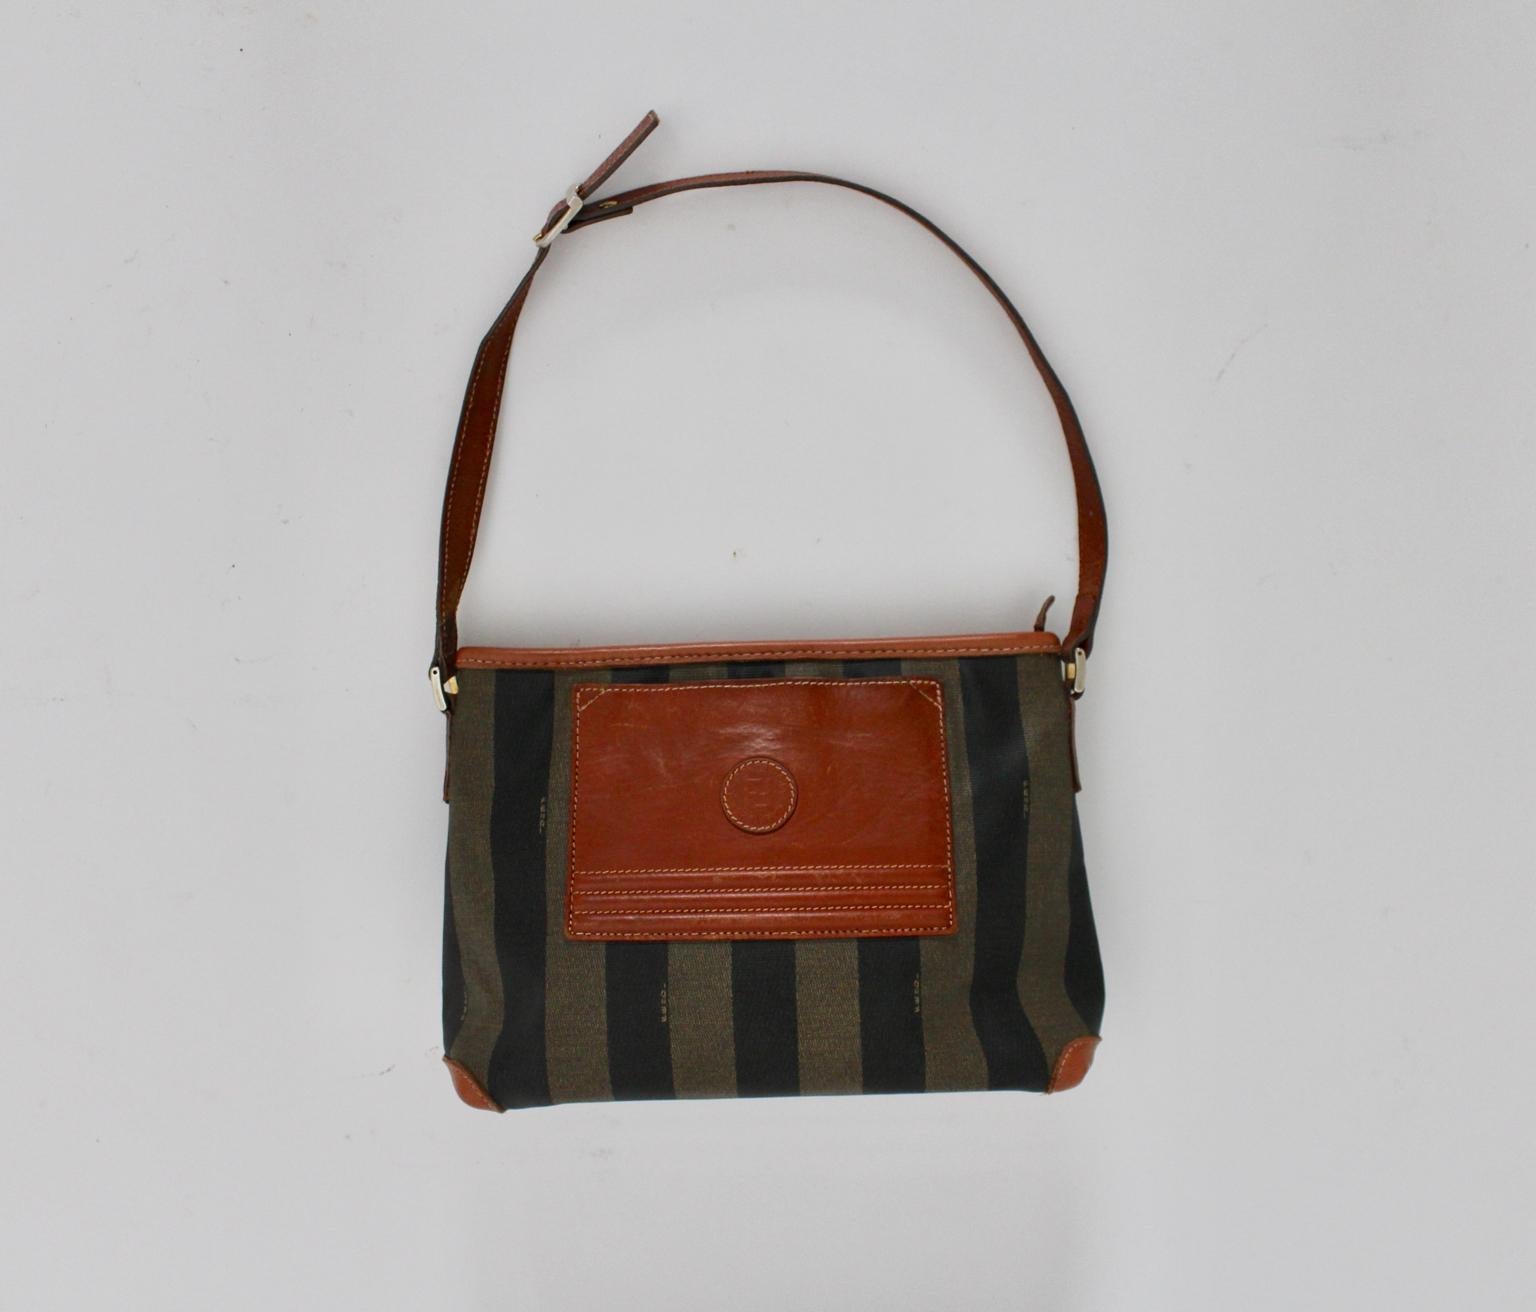 This vintage shoulder bag by Fendi shows a coated canvas surface with leather details.
Its zip closure opens a black lining with a side pocket, also to open with a zip.
The shoulder bag shows a preloved fair condition with signs of age and use. A